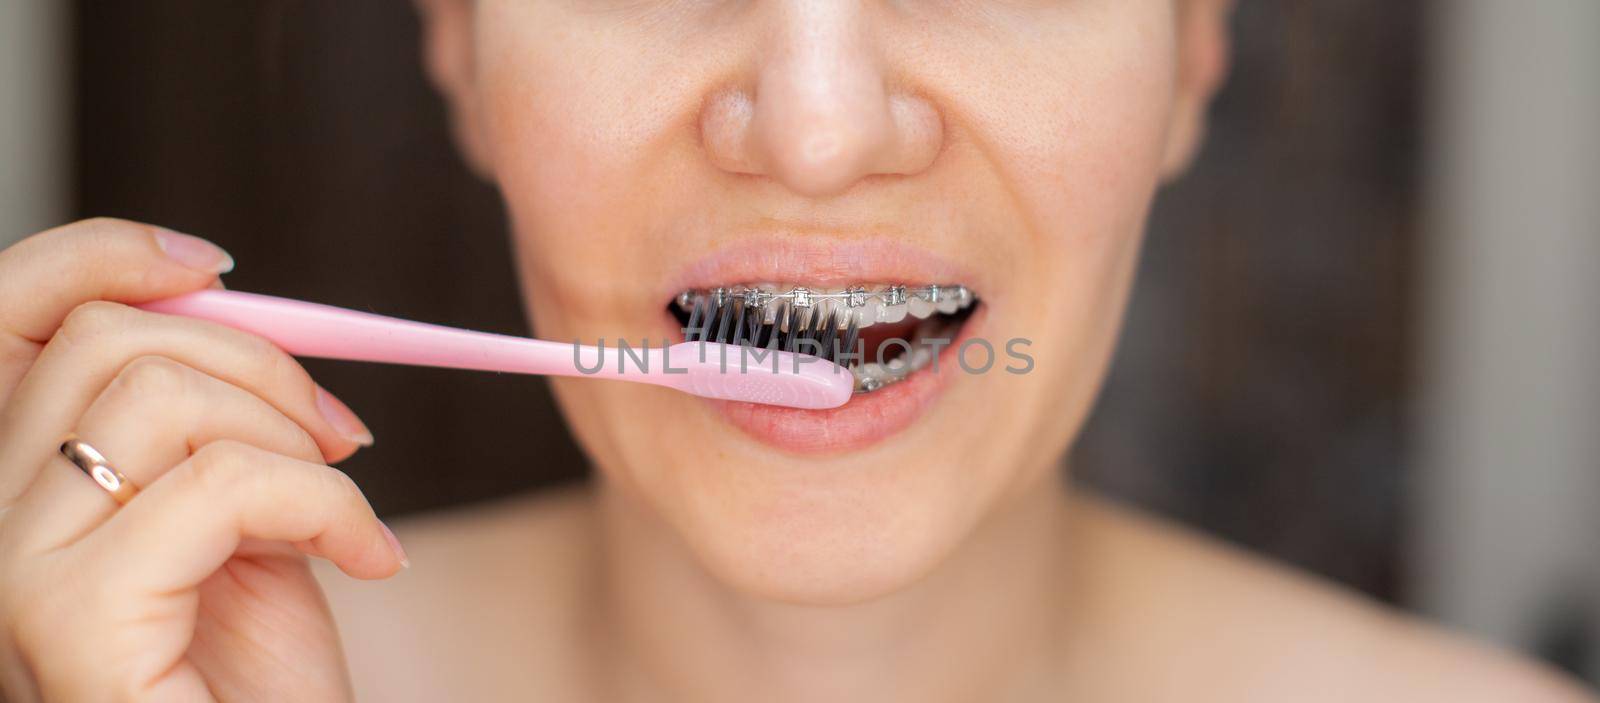 Girl with braces on her teeth brushing her teeth with a toothbrush, close-up. Dental and oral care. Braces for leveling teeth